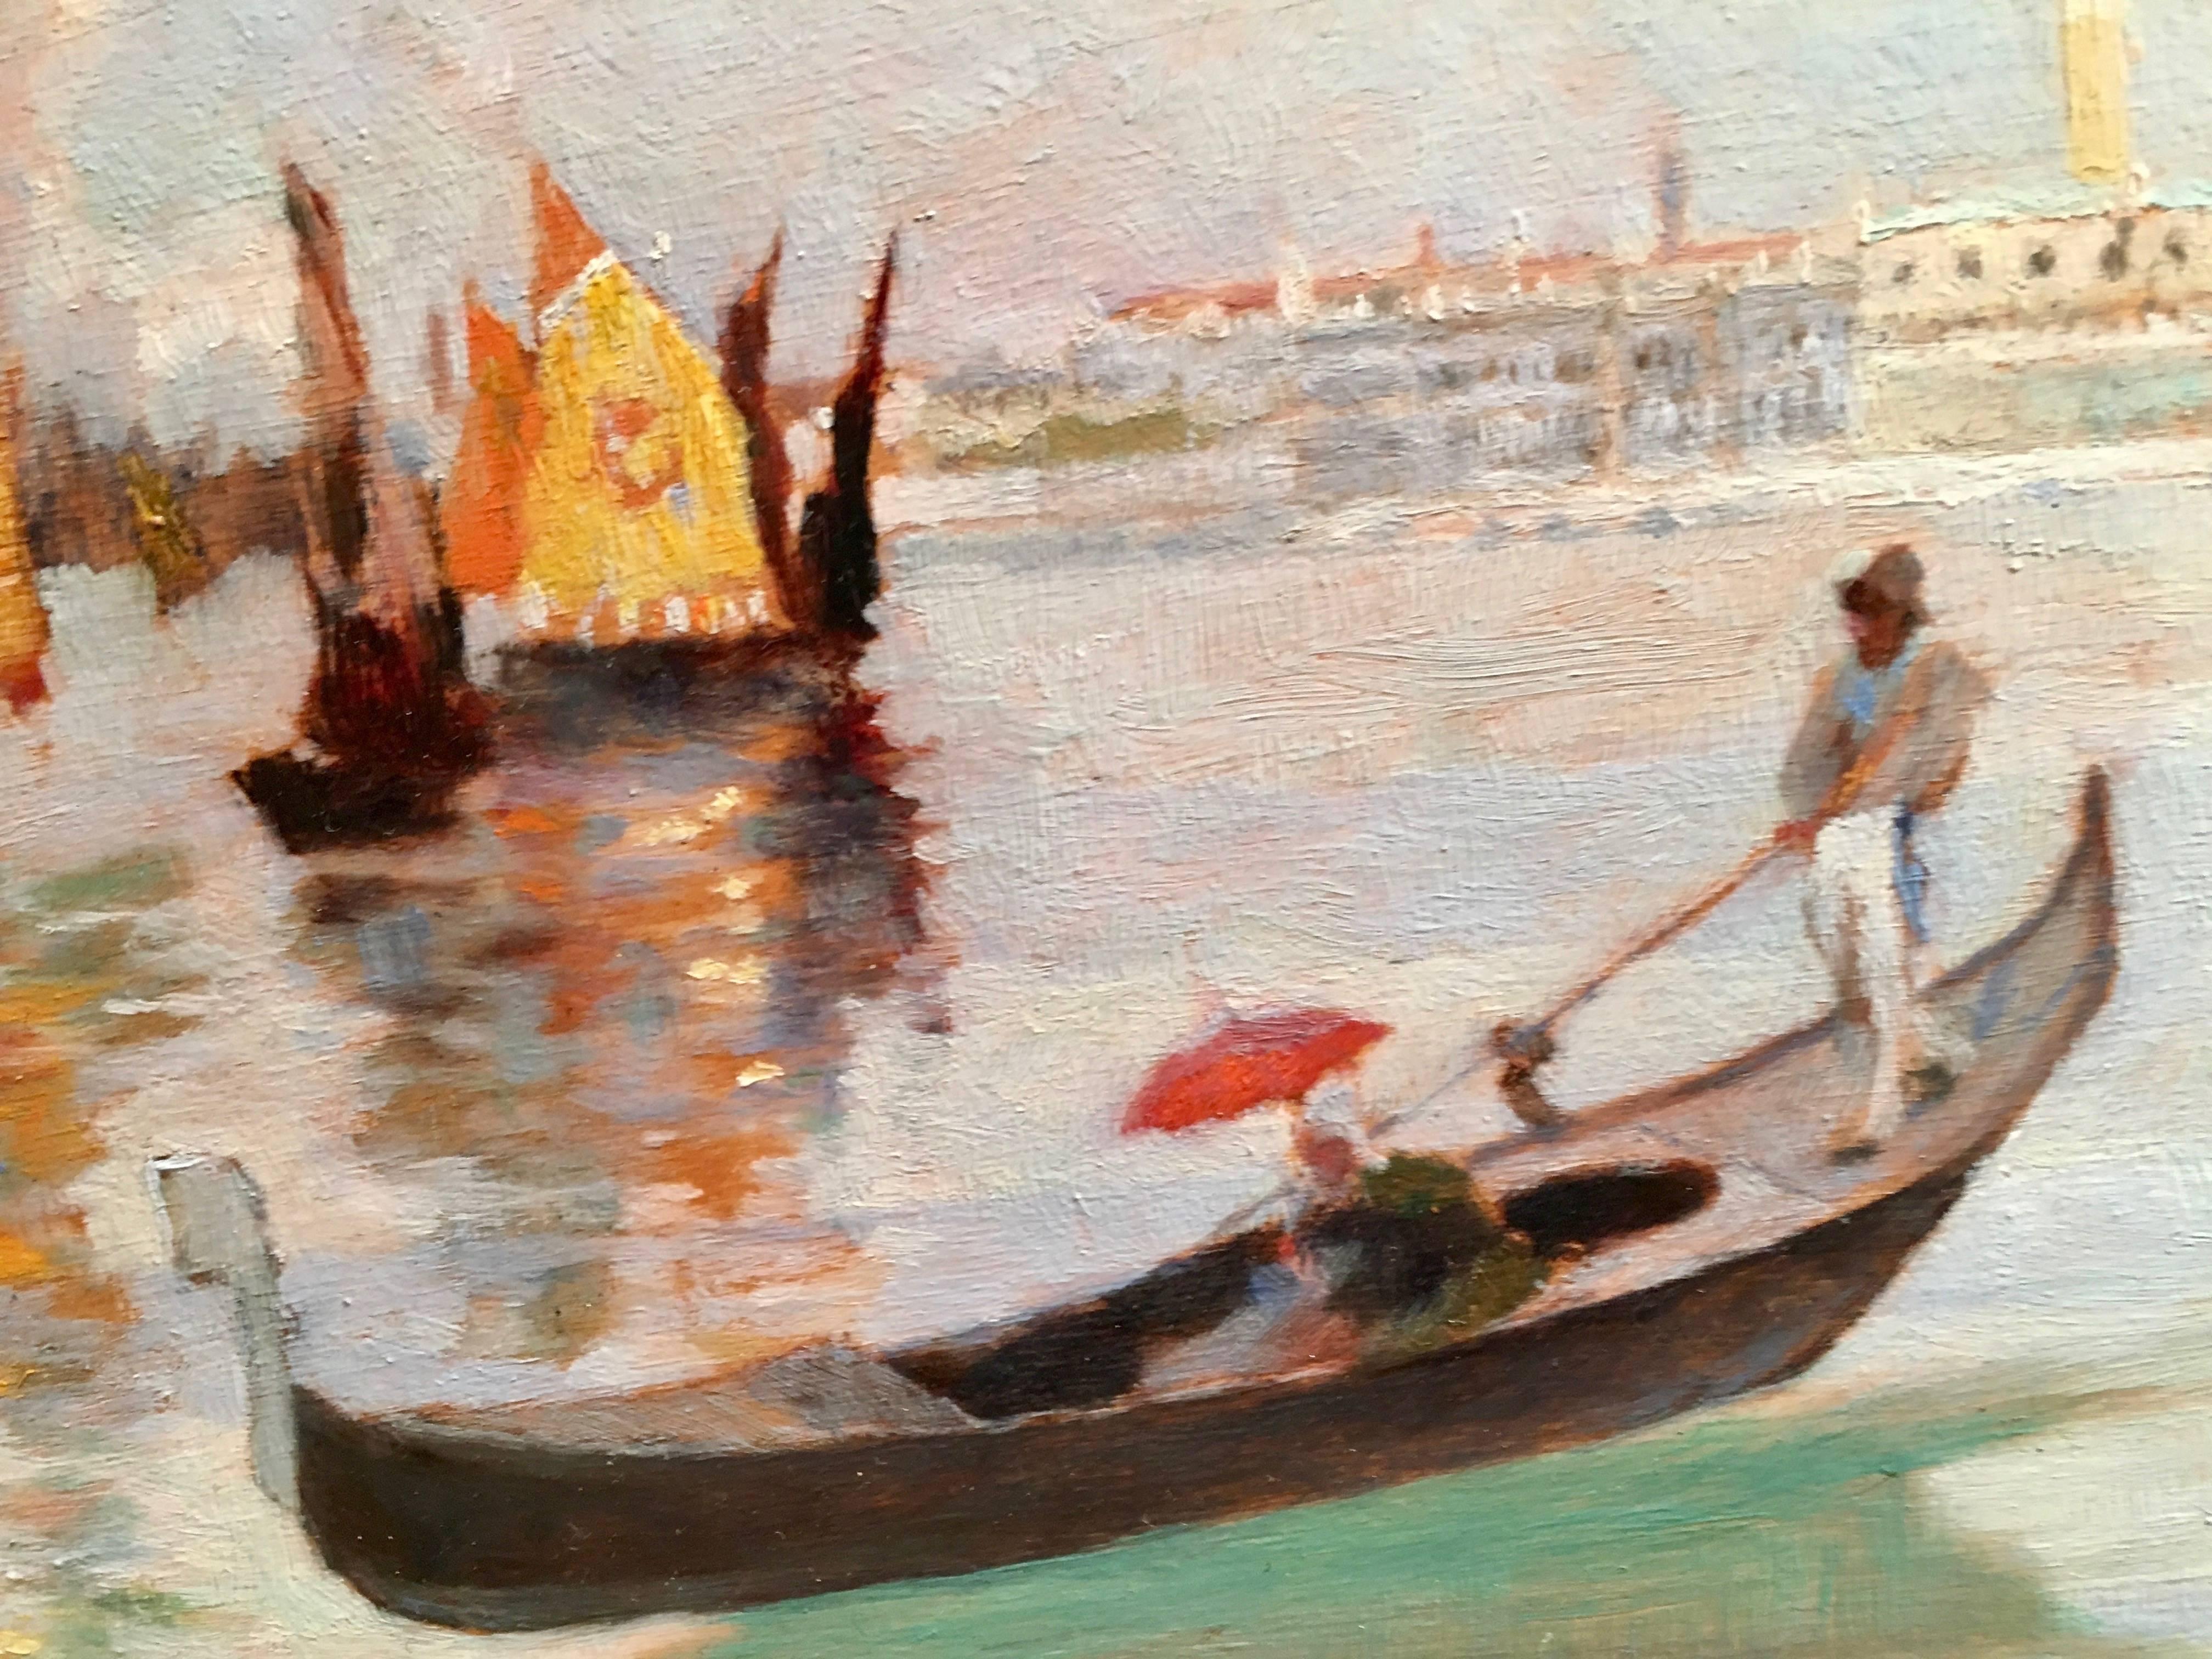 David Woodlock Figurative Painting - Early 20th century Gondola on a canal in Venice Italy